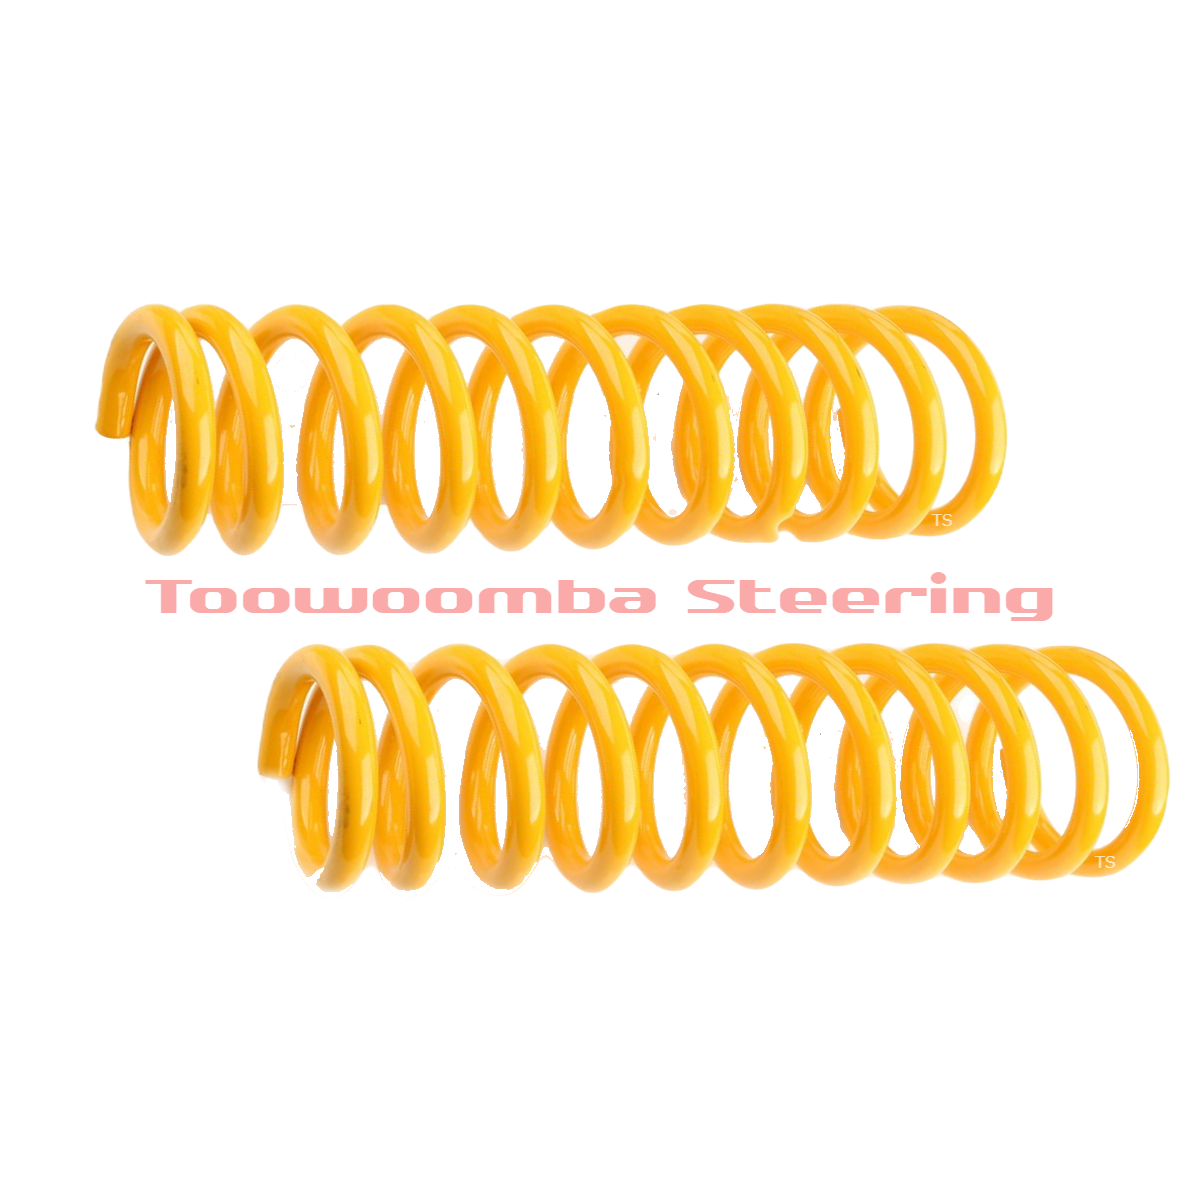 Front Lowered King Springs - Ideal for -  Hyundai Excel X3 10/1994 – 5/1997, Hyundai Excel X3 (CONICAL REAR SPRING) 6/1997 – 2000, Datsun 1600 1968-1972 - (KHFL-114)